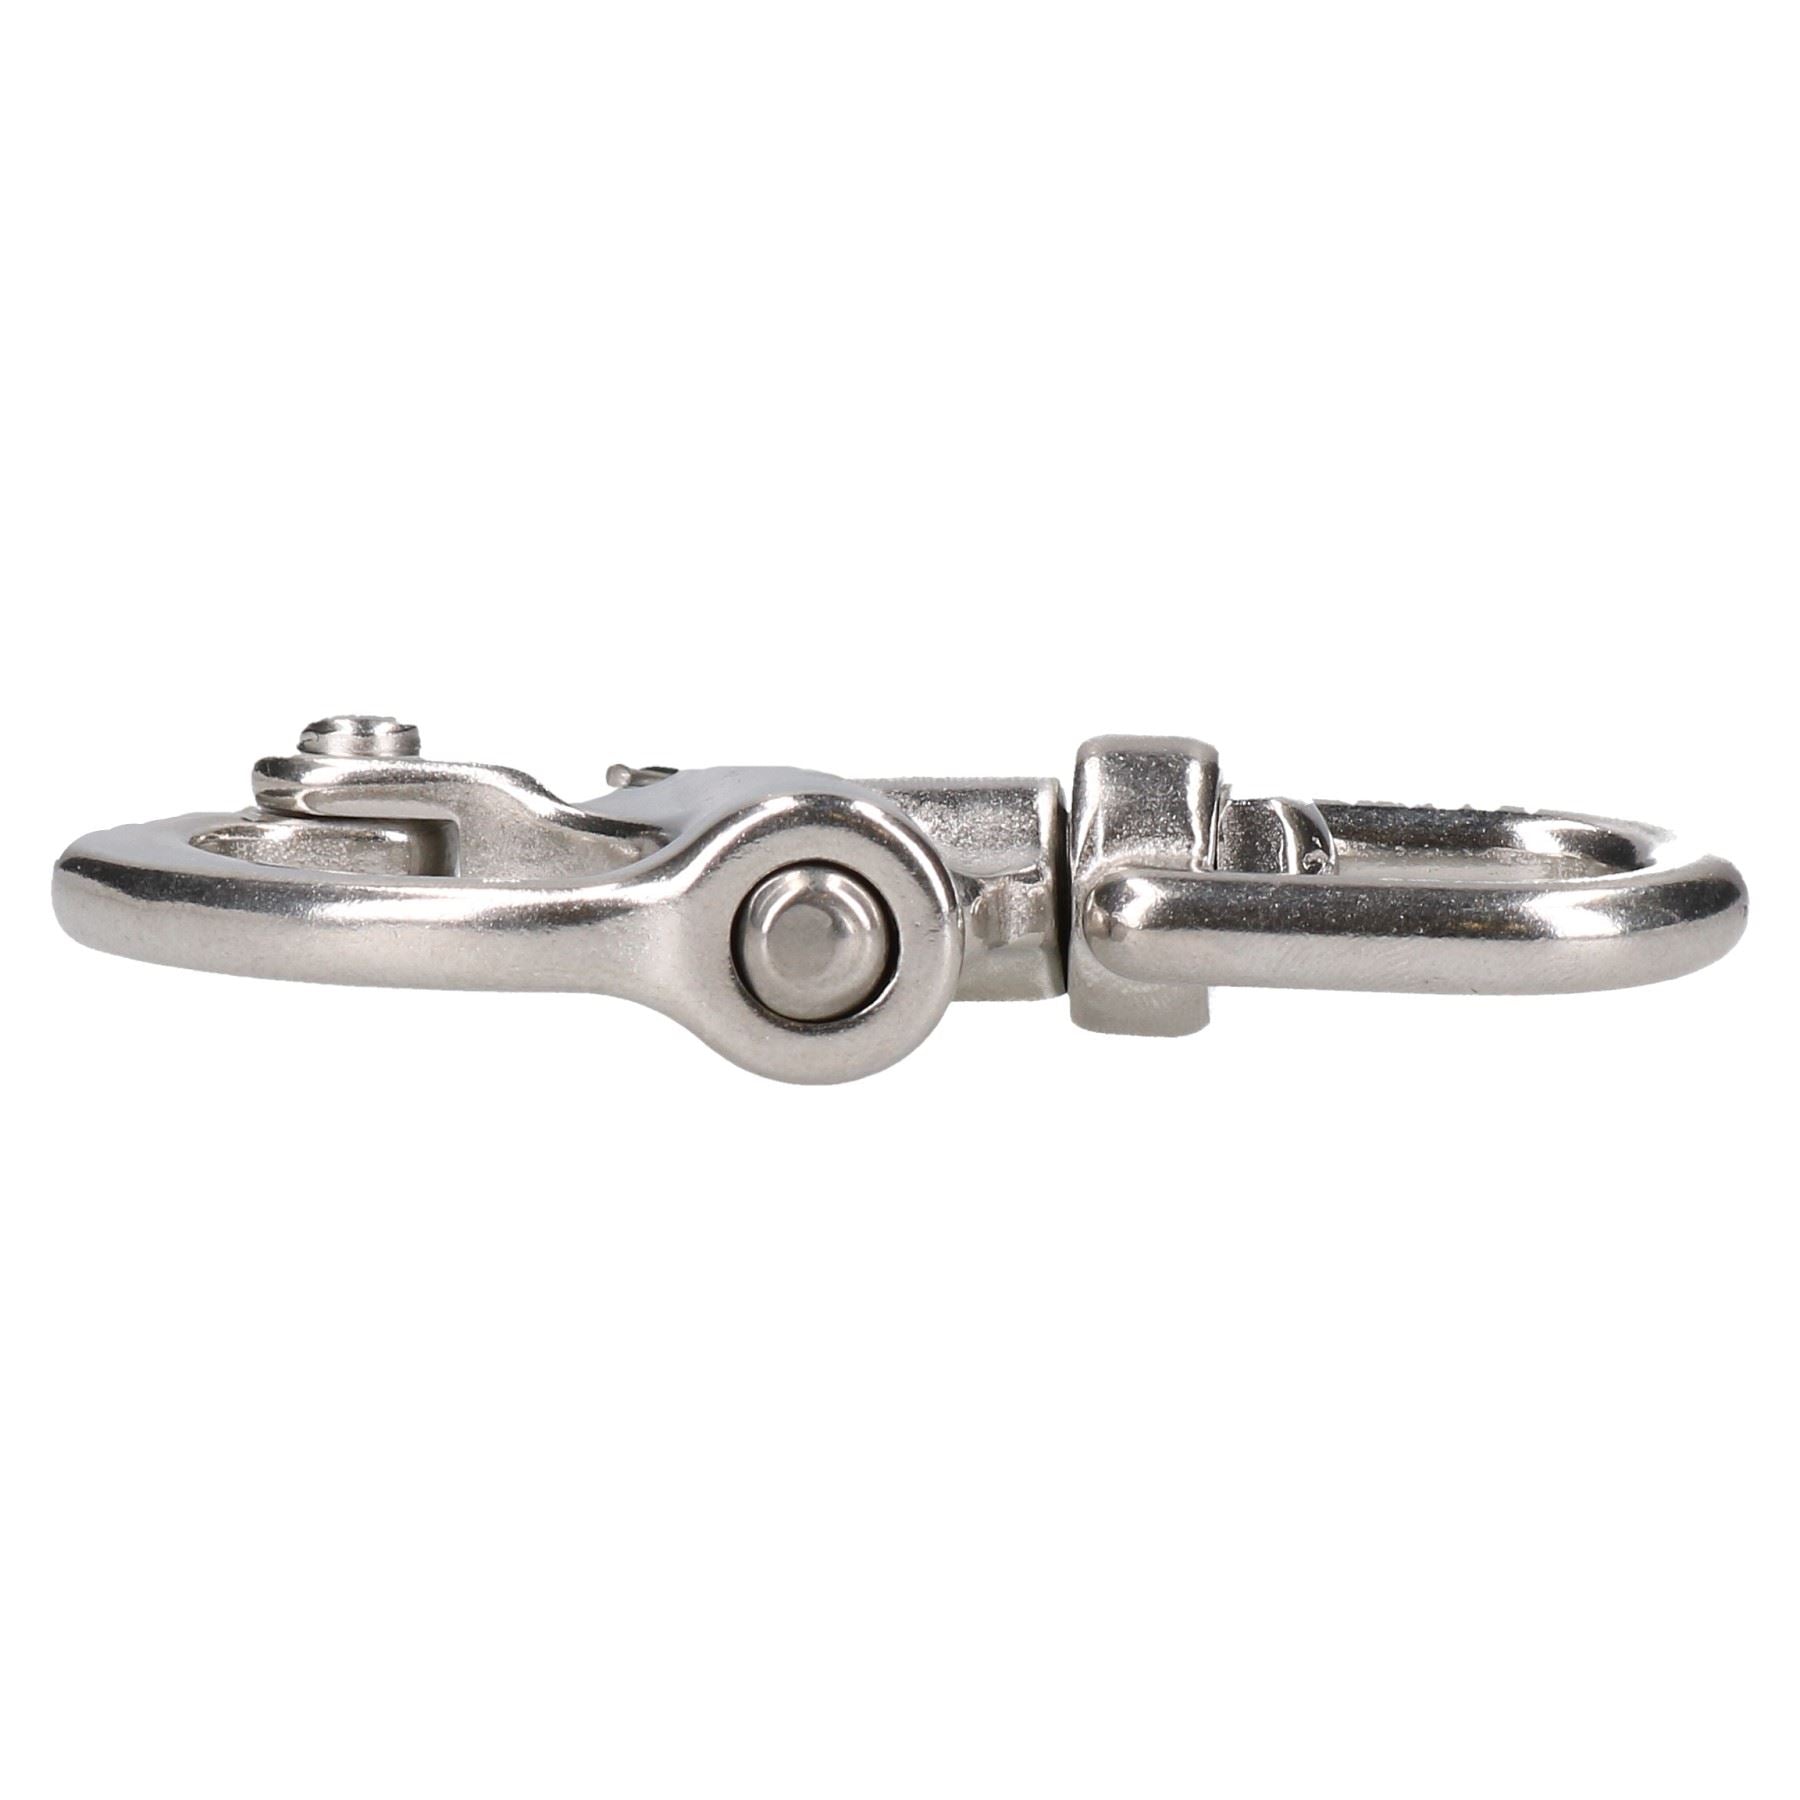 Snap Shackle with Swivel Marine Grade 316 Stainless Steel Rigging Carabiner